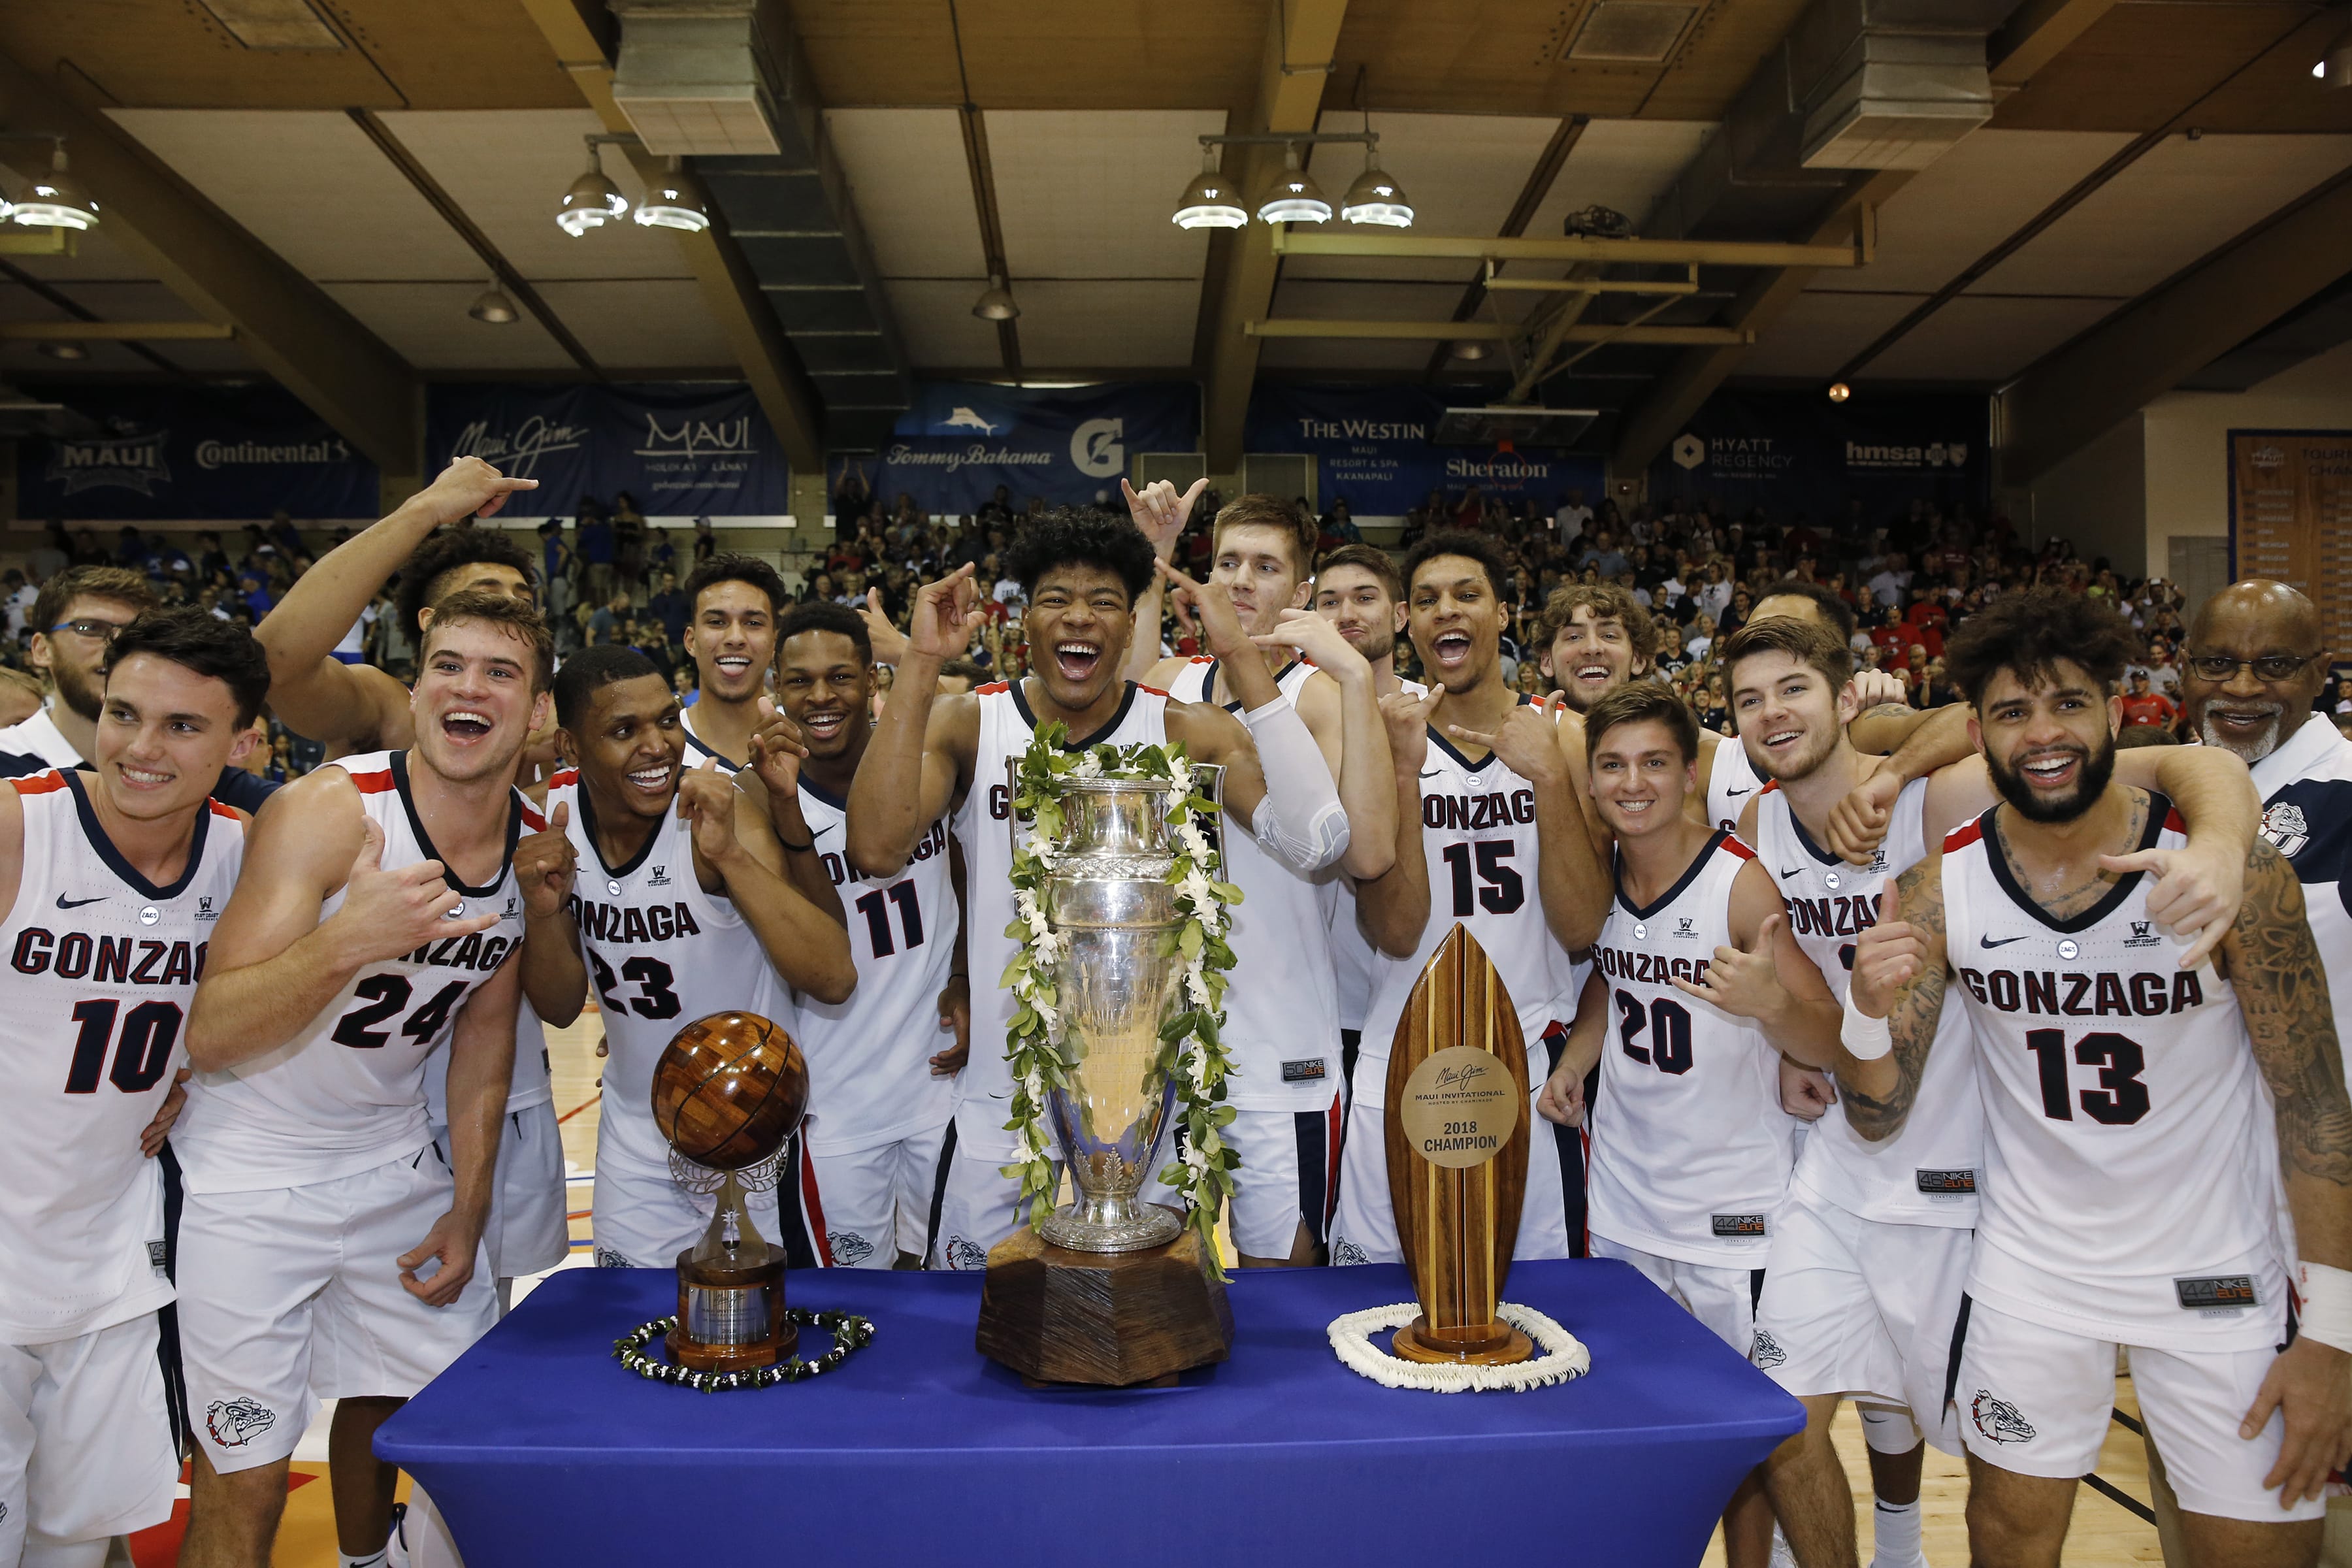 Gonzaga players celebrate after defeating Duke 89-87 in an NCAA college basketball game to win the Maui Invitational, Wednesday, Nov. 21, 2018, in Lahaina, Hawaii.